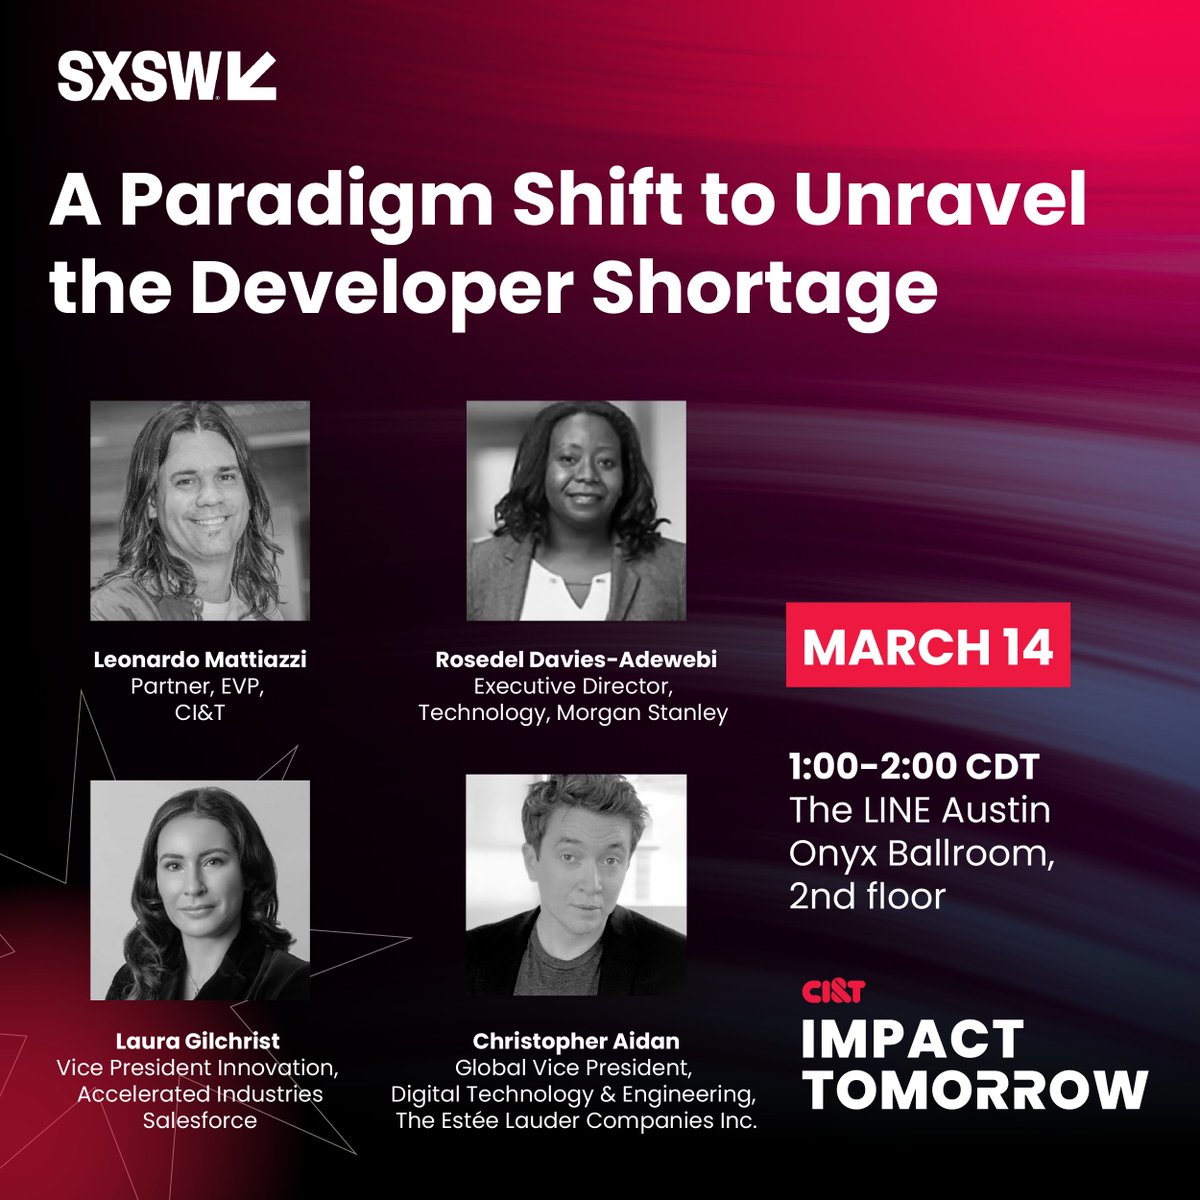 Leo Matiazzi, EVP at CI&T, will moderate a discussion about the foundational solutions to course-correct and provide meaningful change for the future tech workforce. Business leaders from @salesforce, @MorganStanley, and @esteelauderco will join the conversation. #SXSW 2023